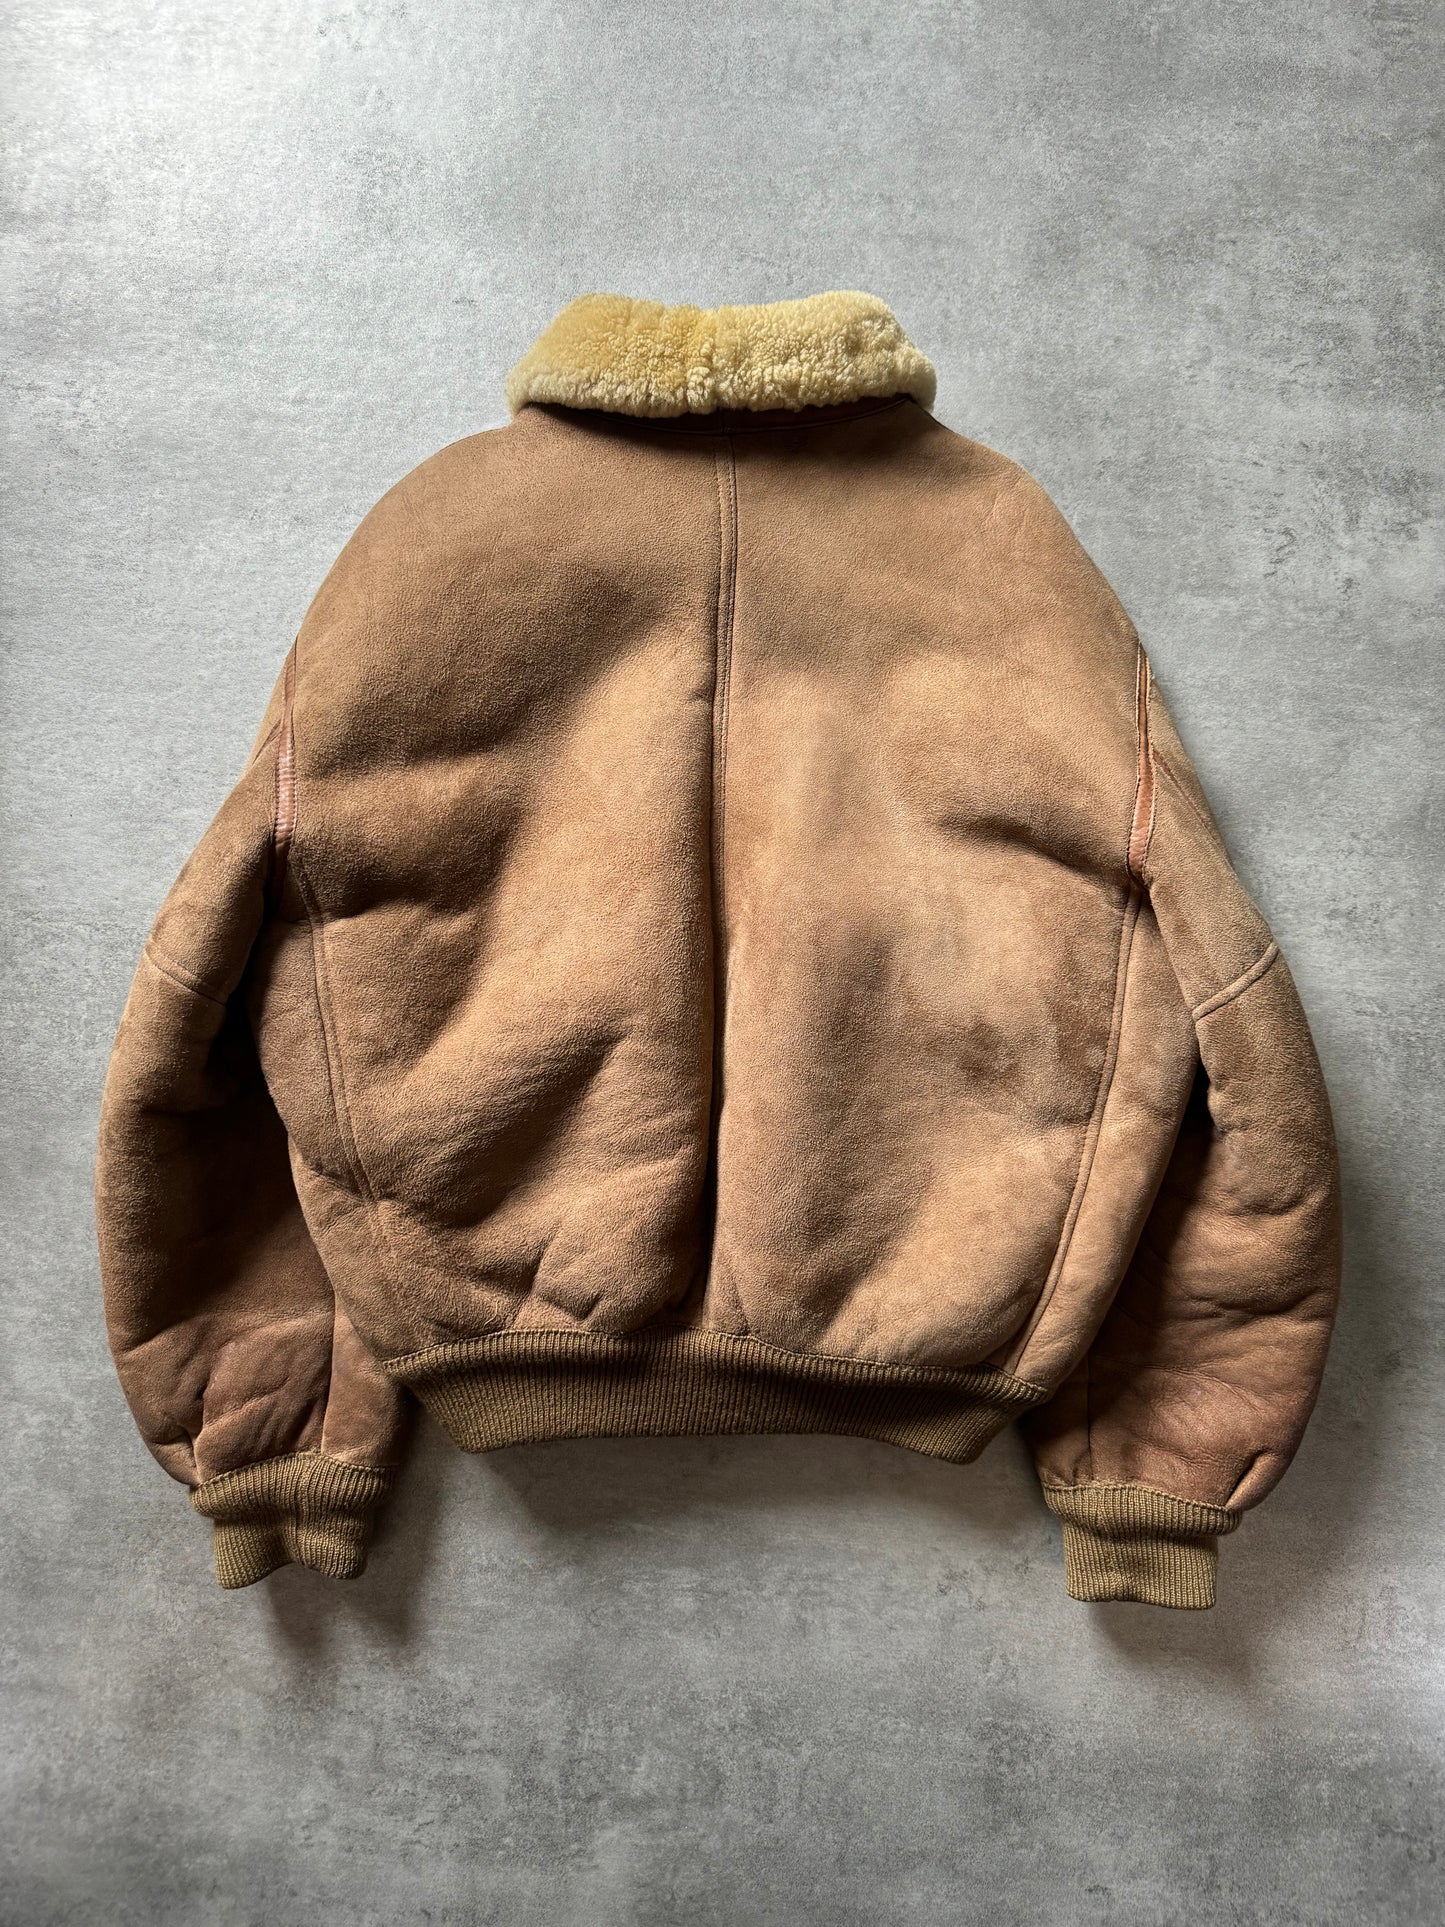 1980s Emporio Armani Camel Shearling Leather Bomber Jacket (L) - 2